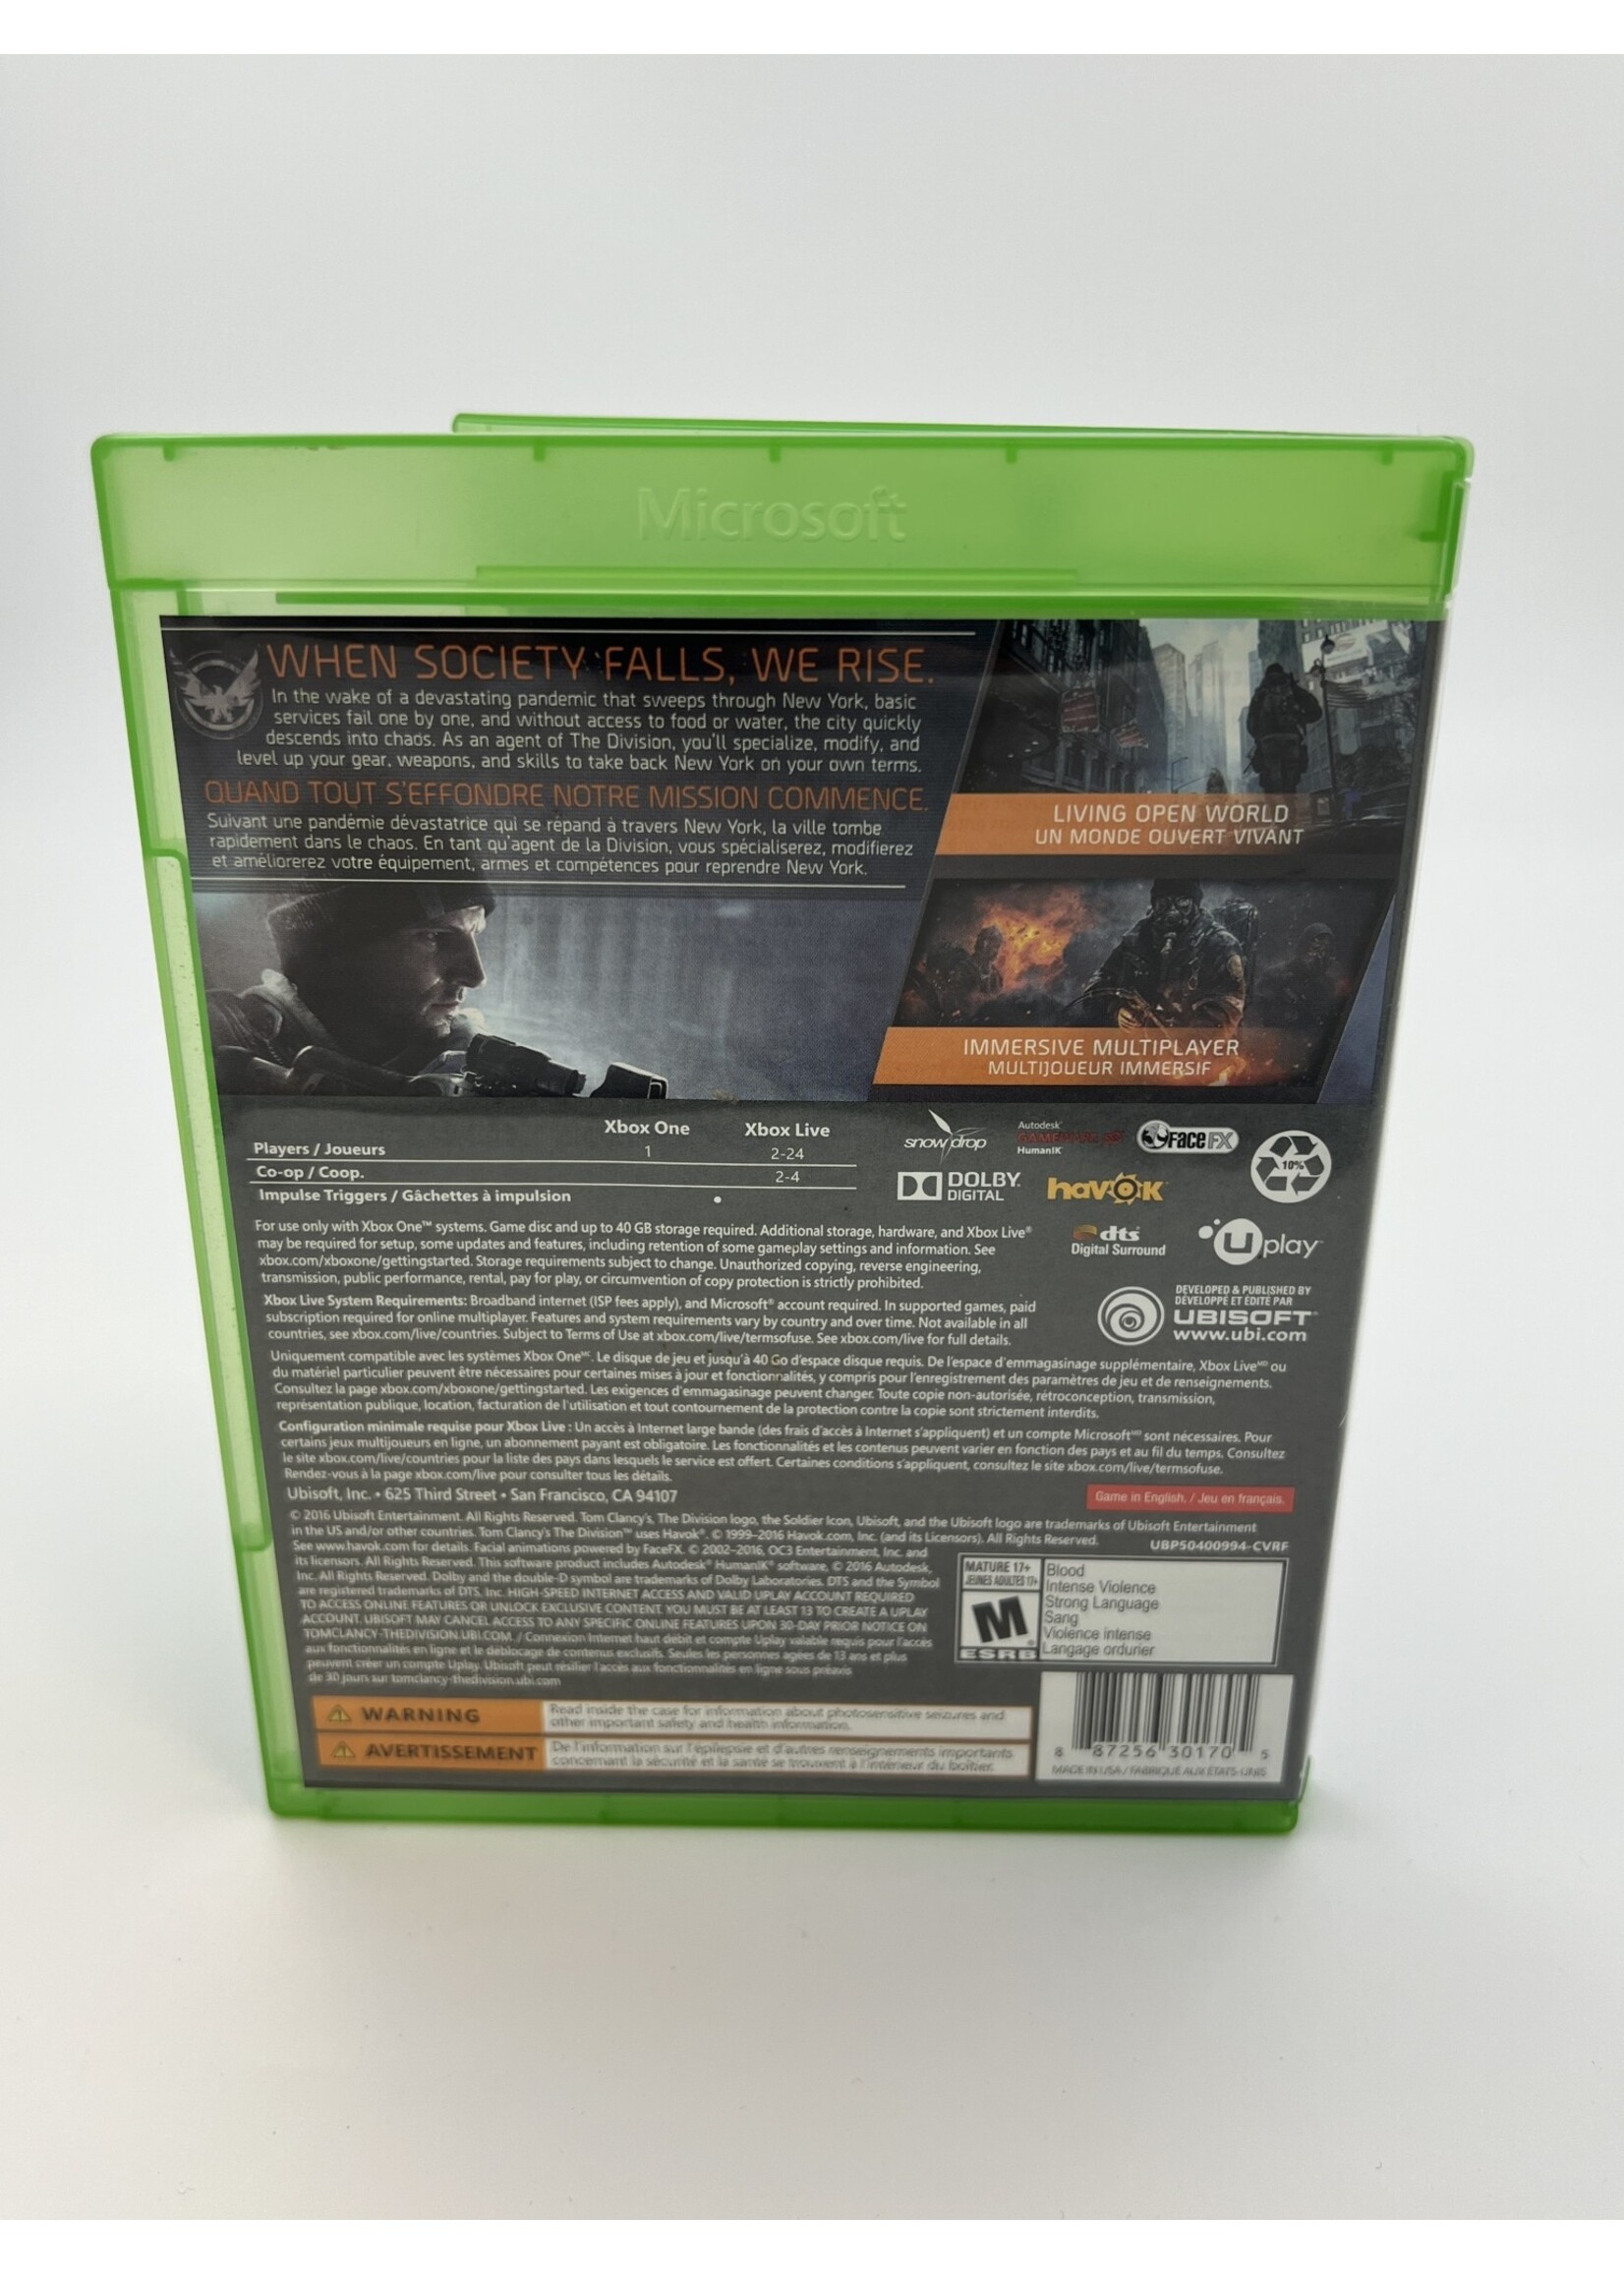 Xbox Tom Clancys The Division Xbox One